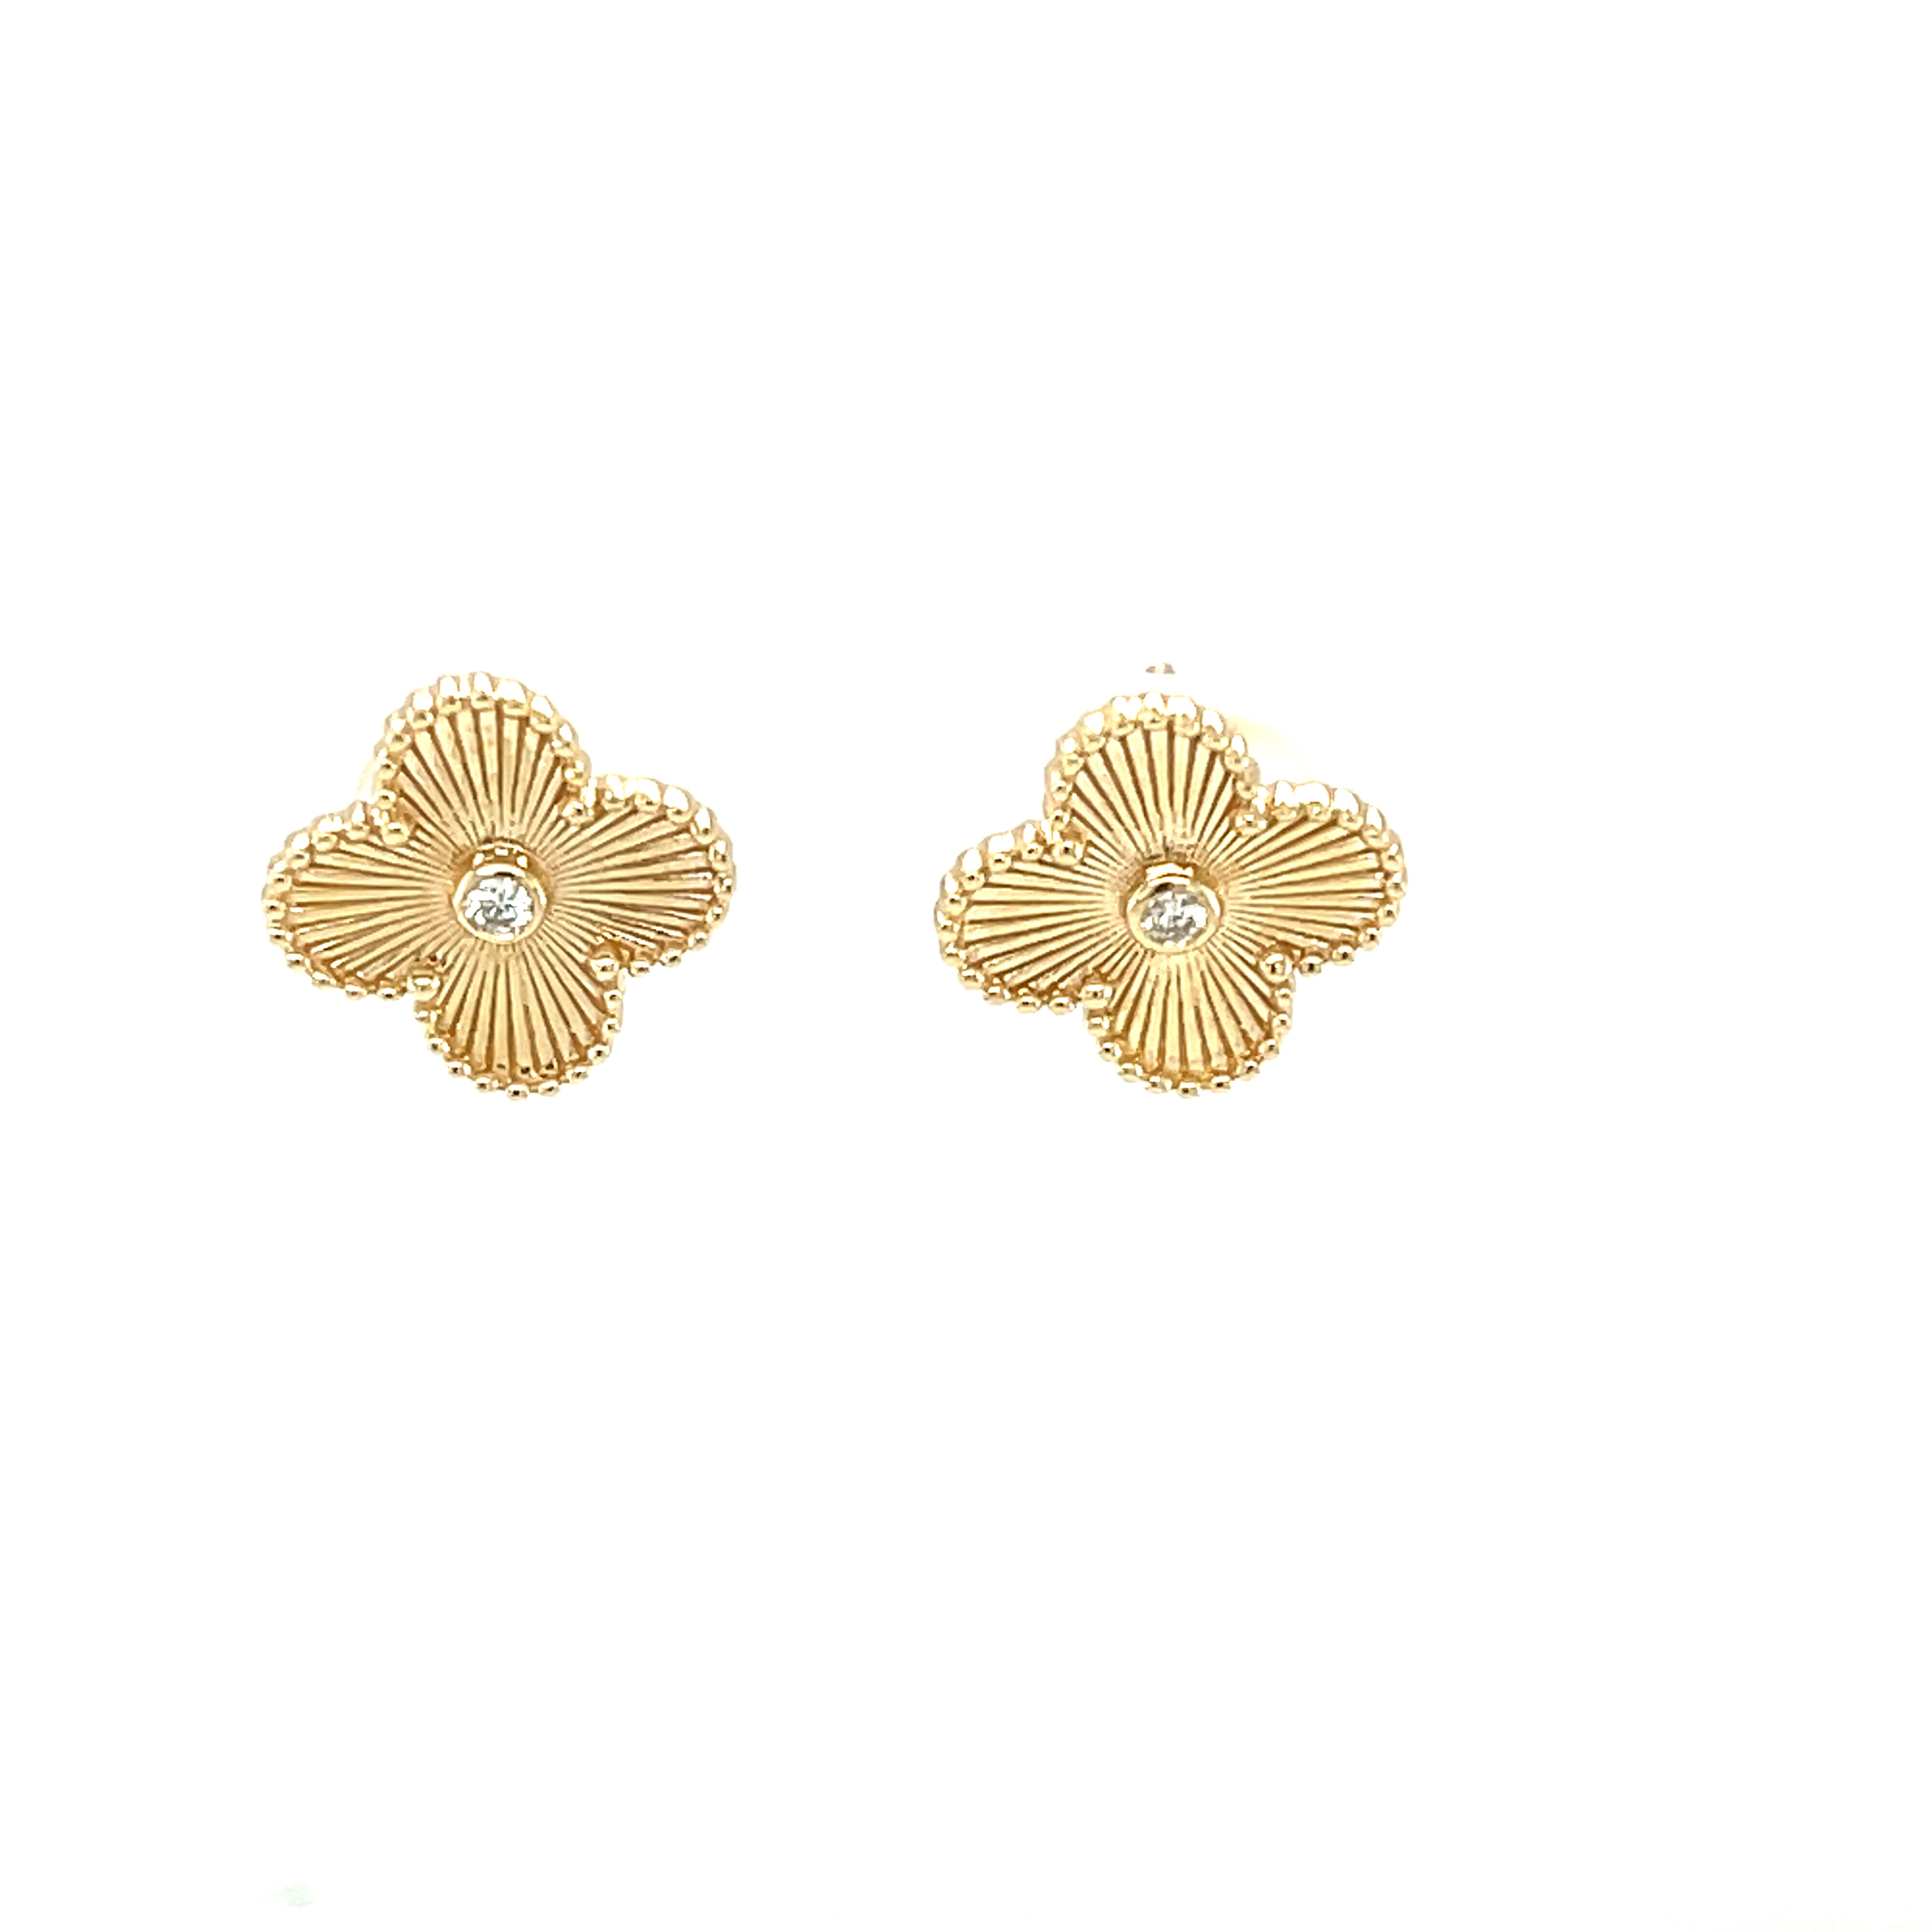 Featured image for “Corrugated Clover Stud Earrings”